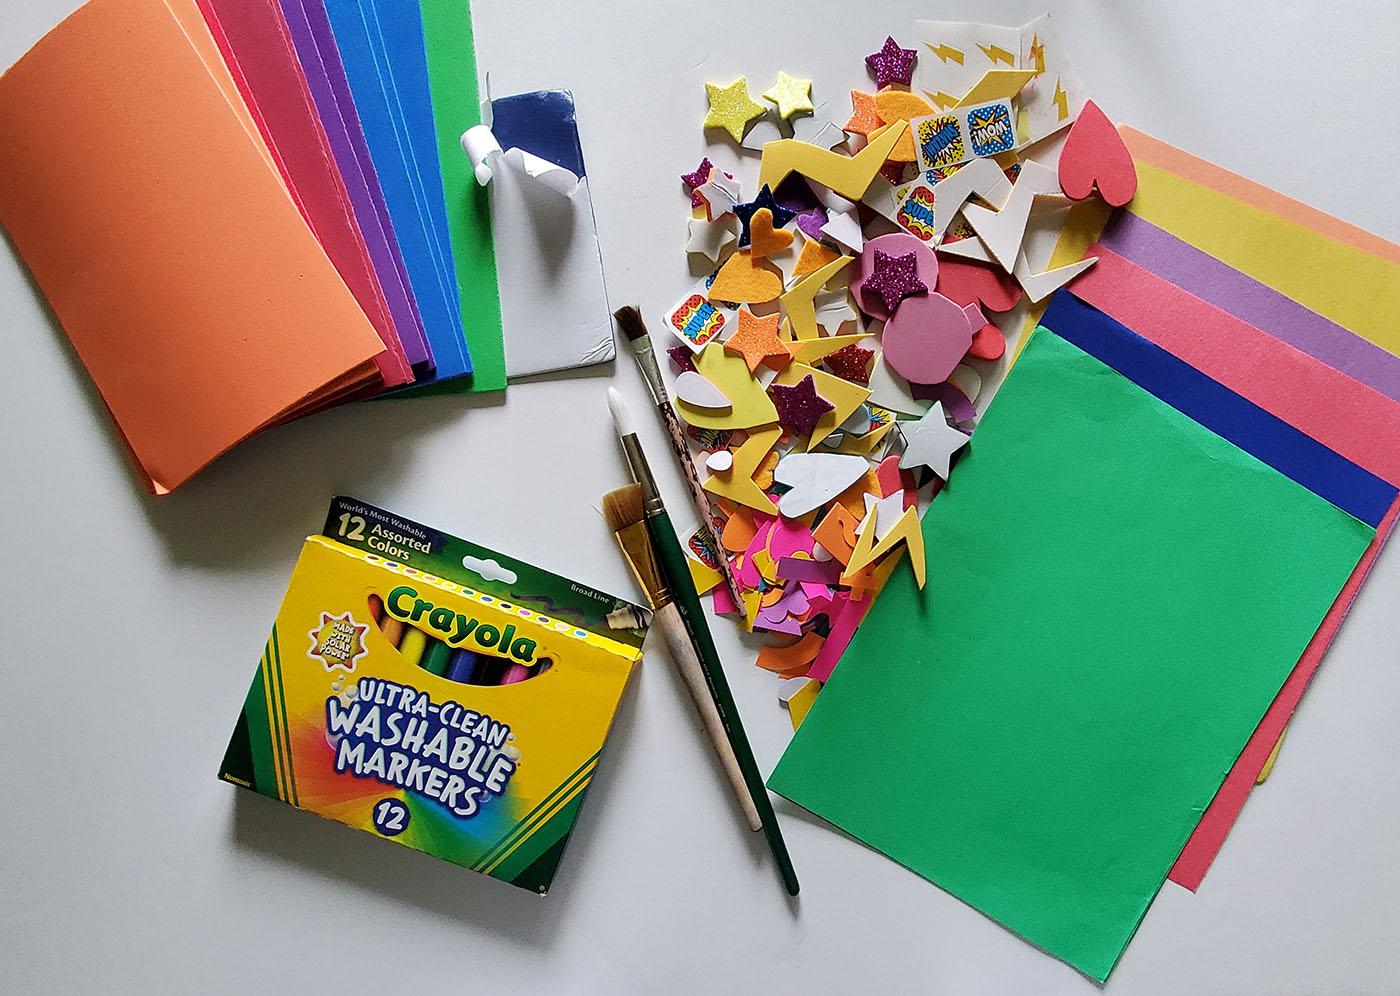 Craft items including crayons, paper, and shapes on a table